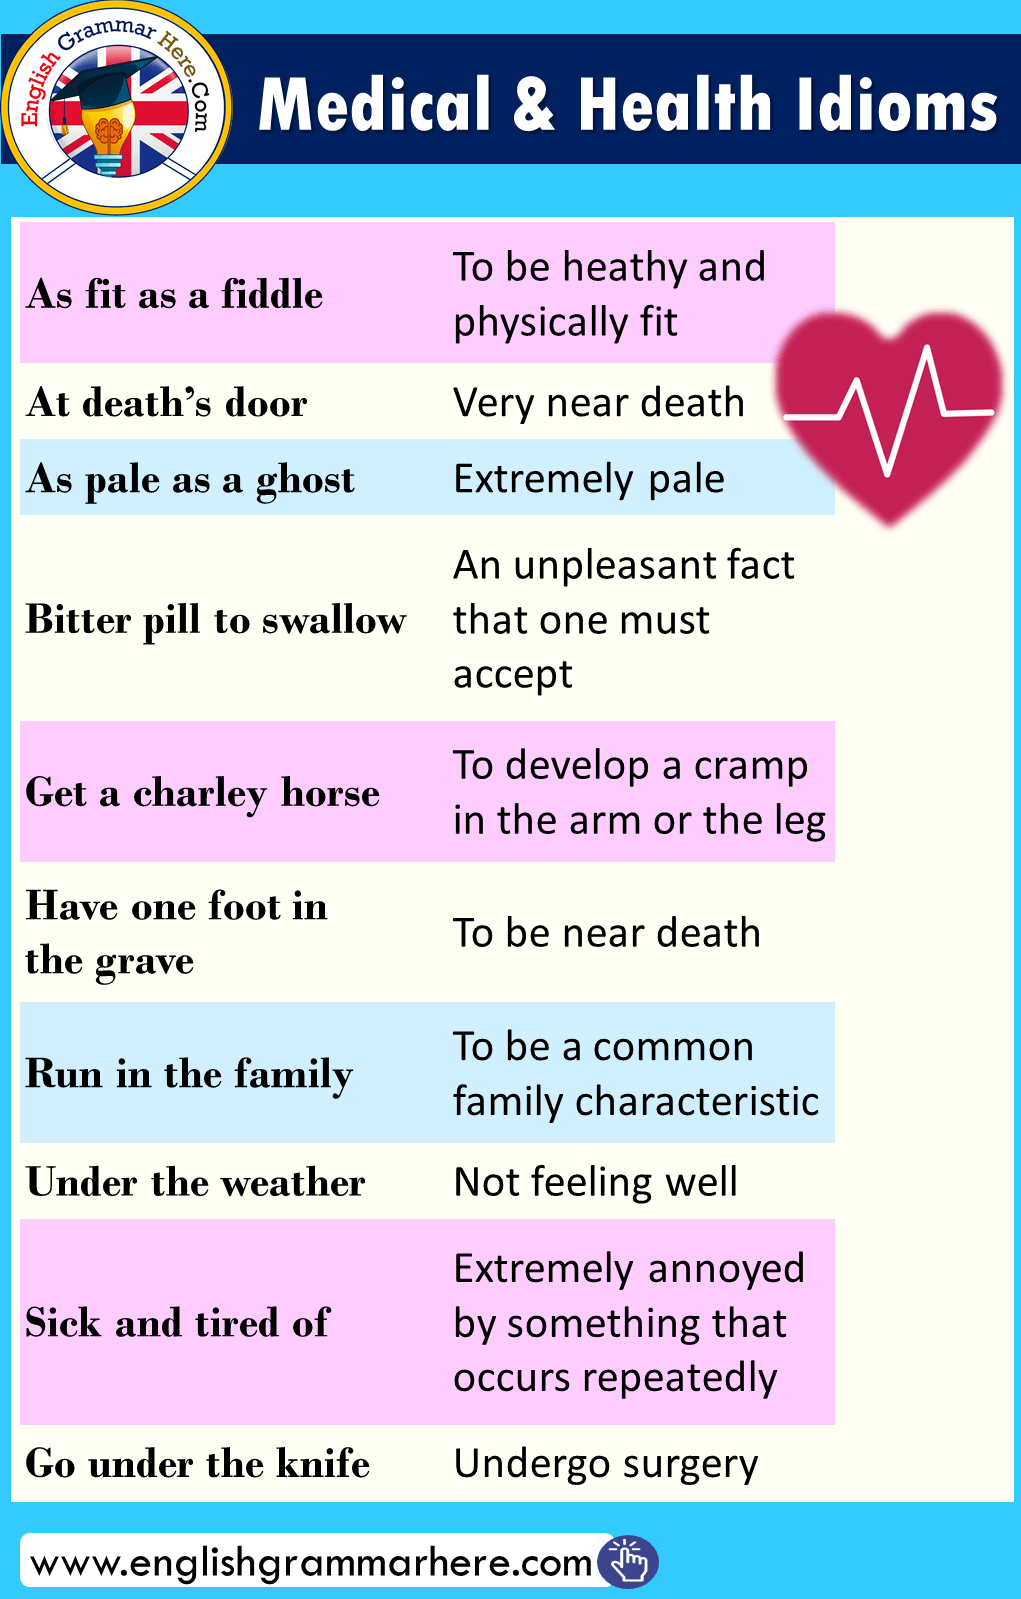 Medical and Health Idioms in English